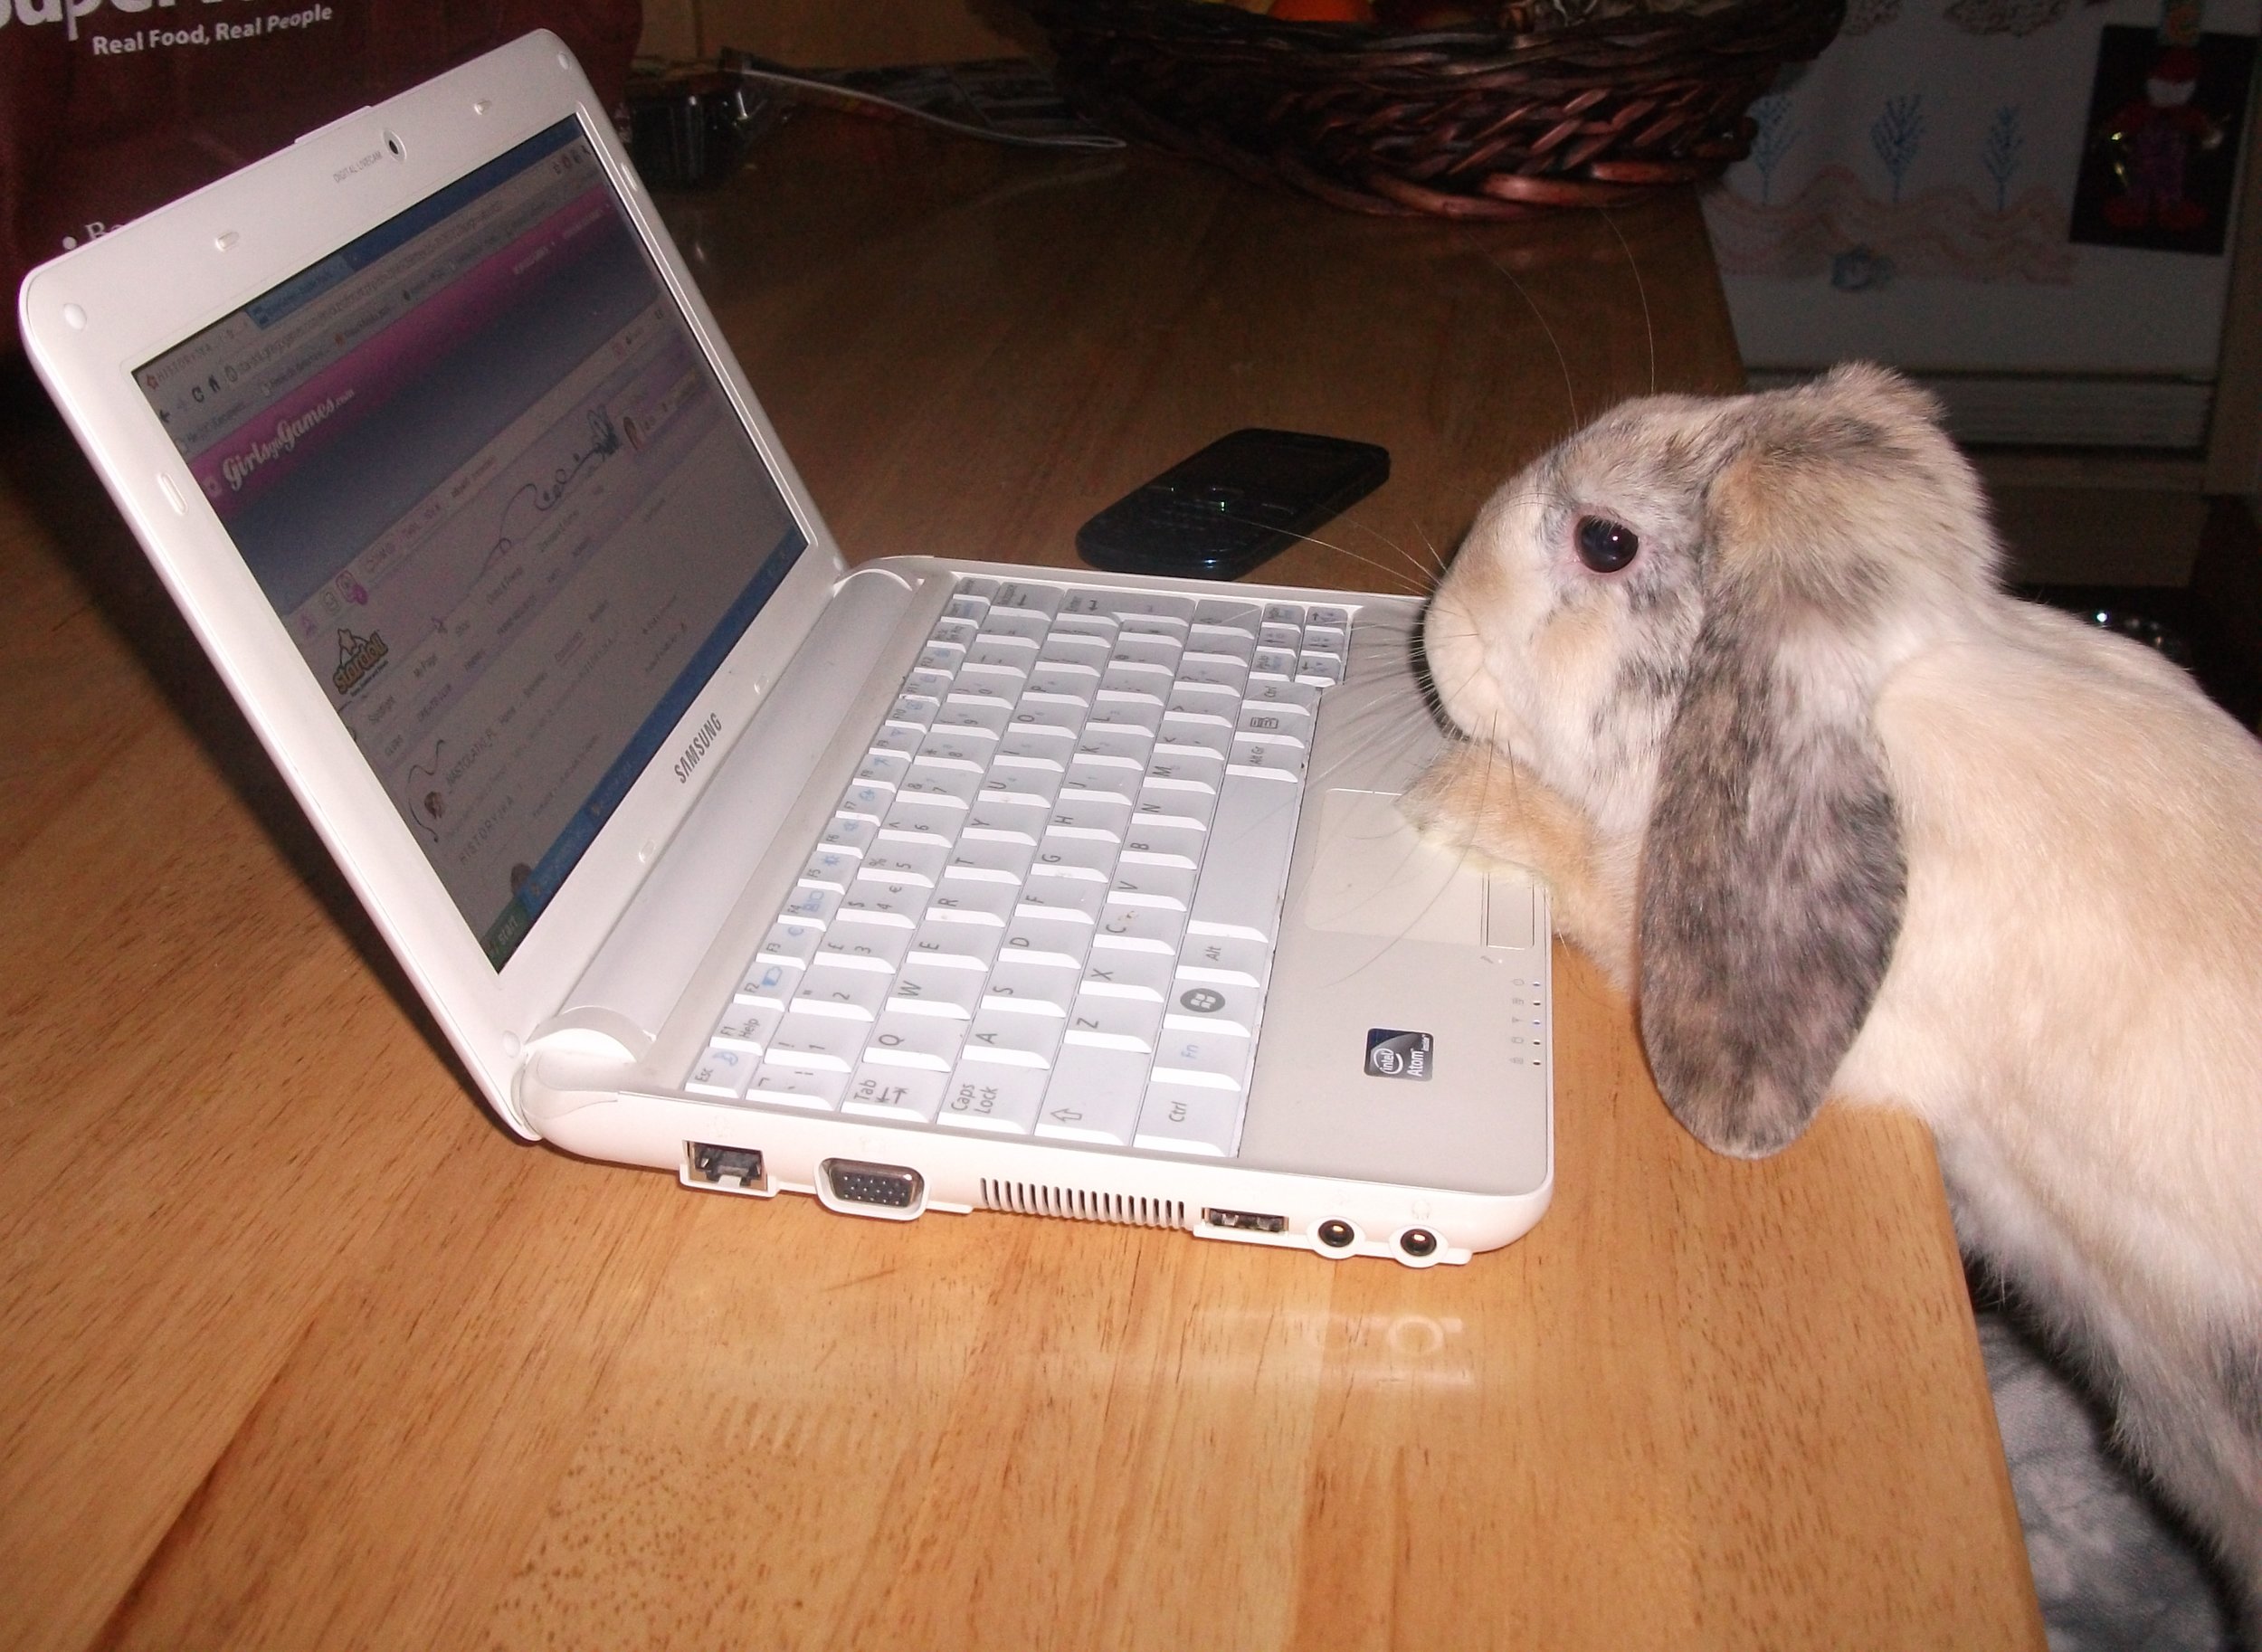 Hmm... Now, How Can I Order Carrots on This Thing?